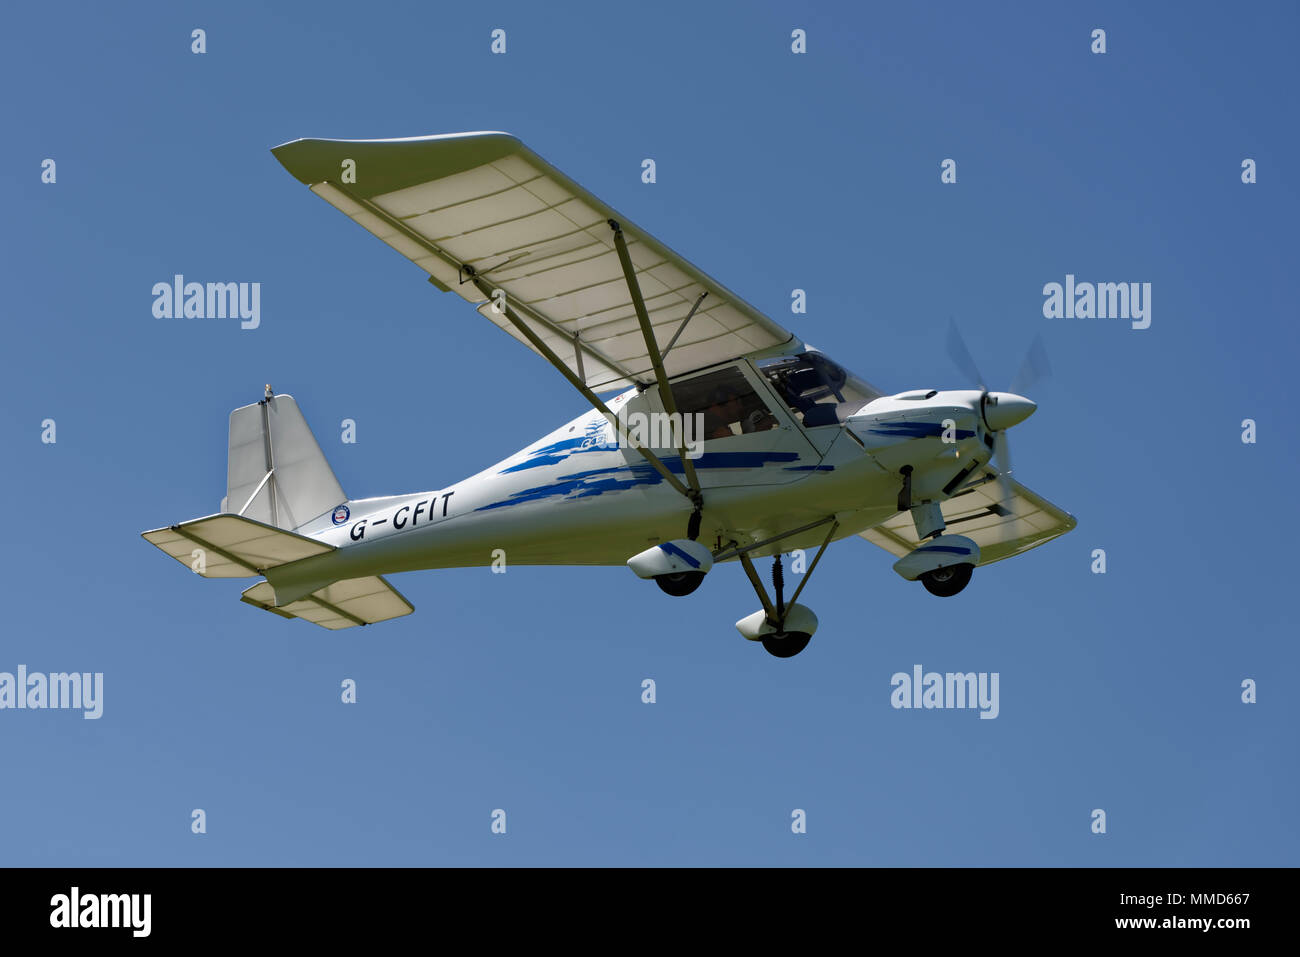 Ikarus C42 light aircraft takes off from Popham Airfield in Hampshire UK Stock Photo